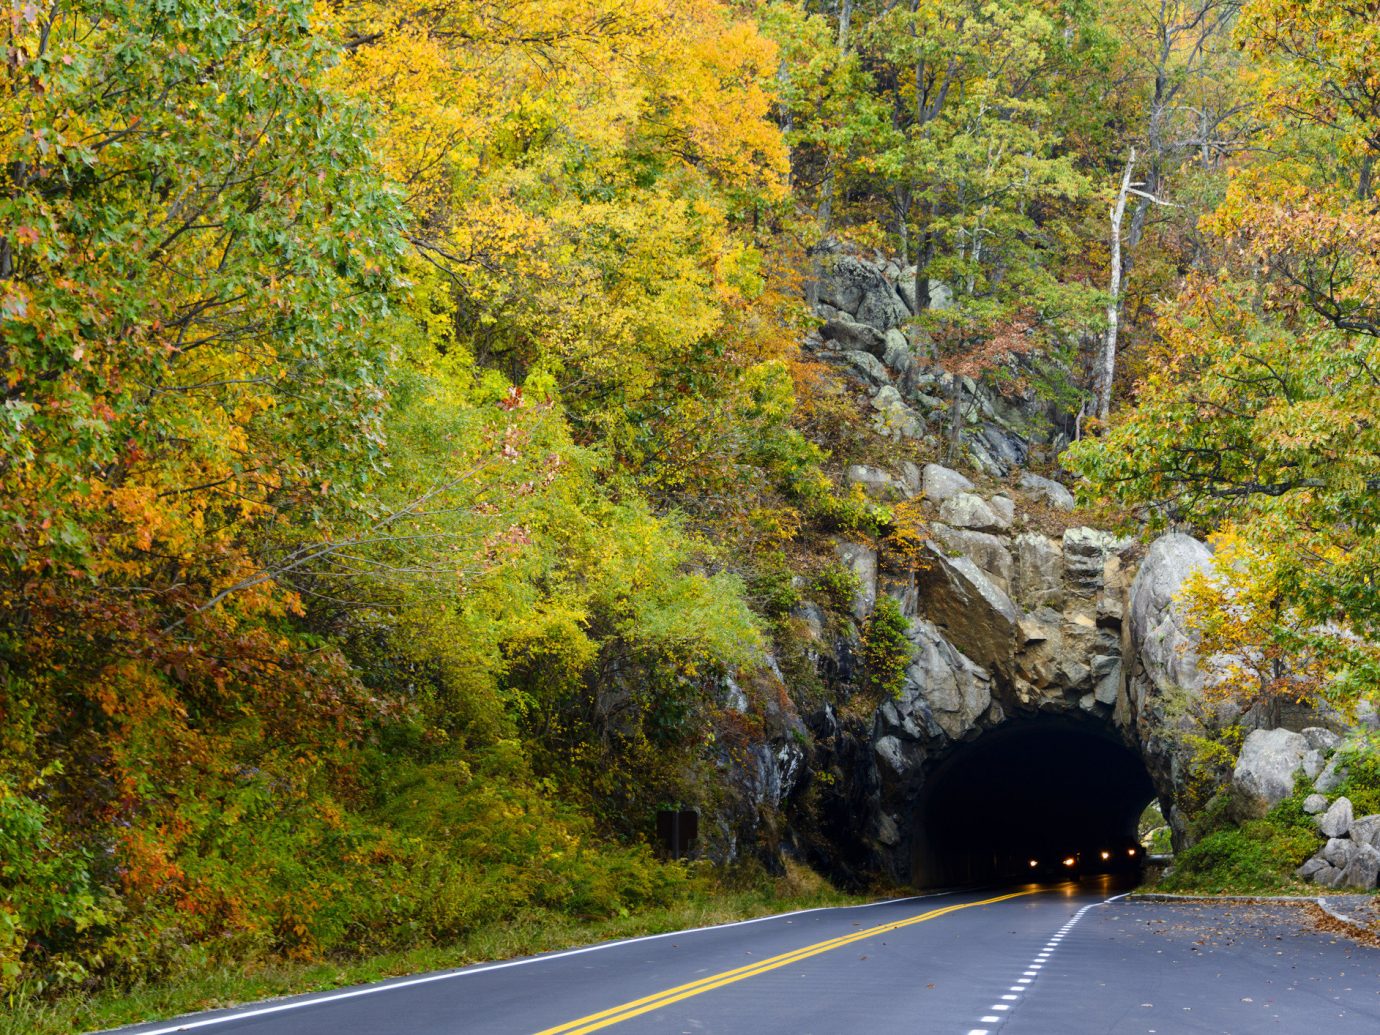 Outdoors + Adventure Road Trips Trip Ideas tree outdoor road leaf Nature autumn yellow vegetation woody plant infrastructure wilderness plant deciduous way scene Forest woodland path rock temperate broadleaf and mixed forest landscape state park biome escarpment national park branch water